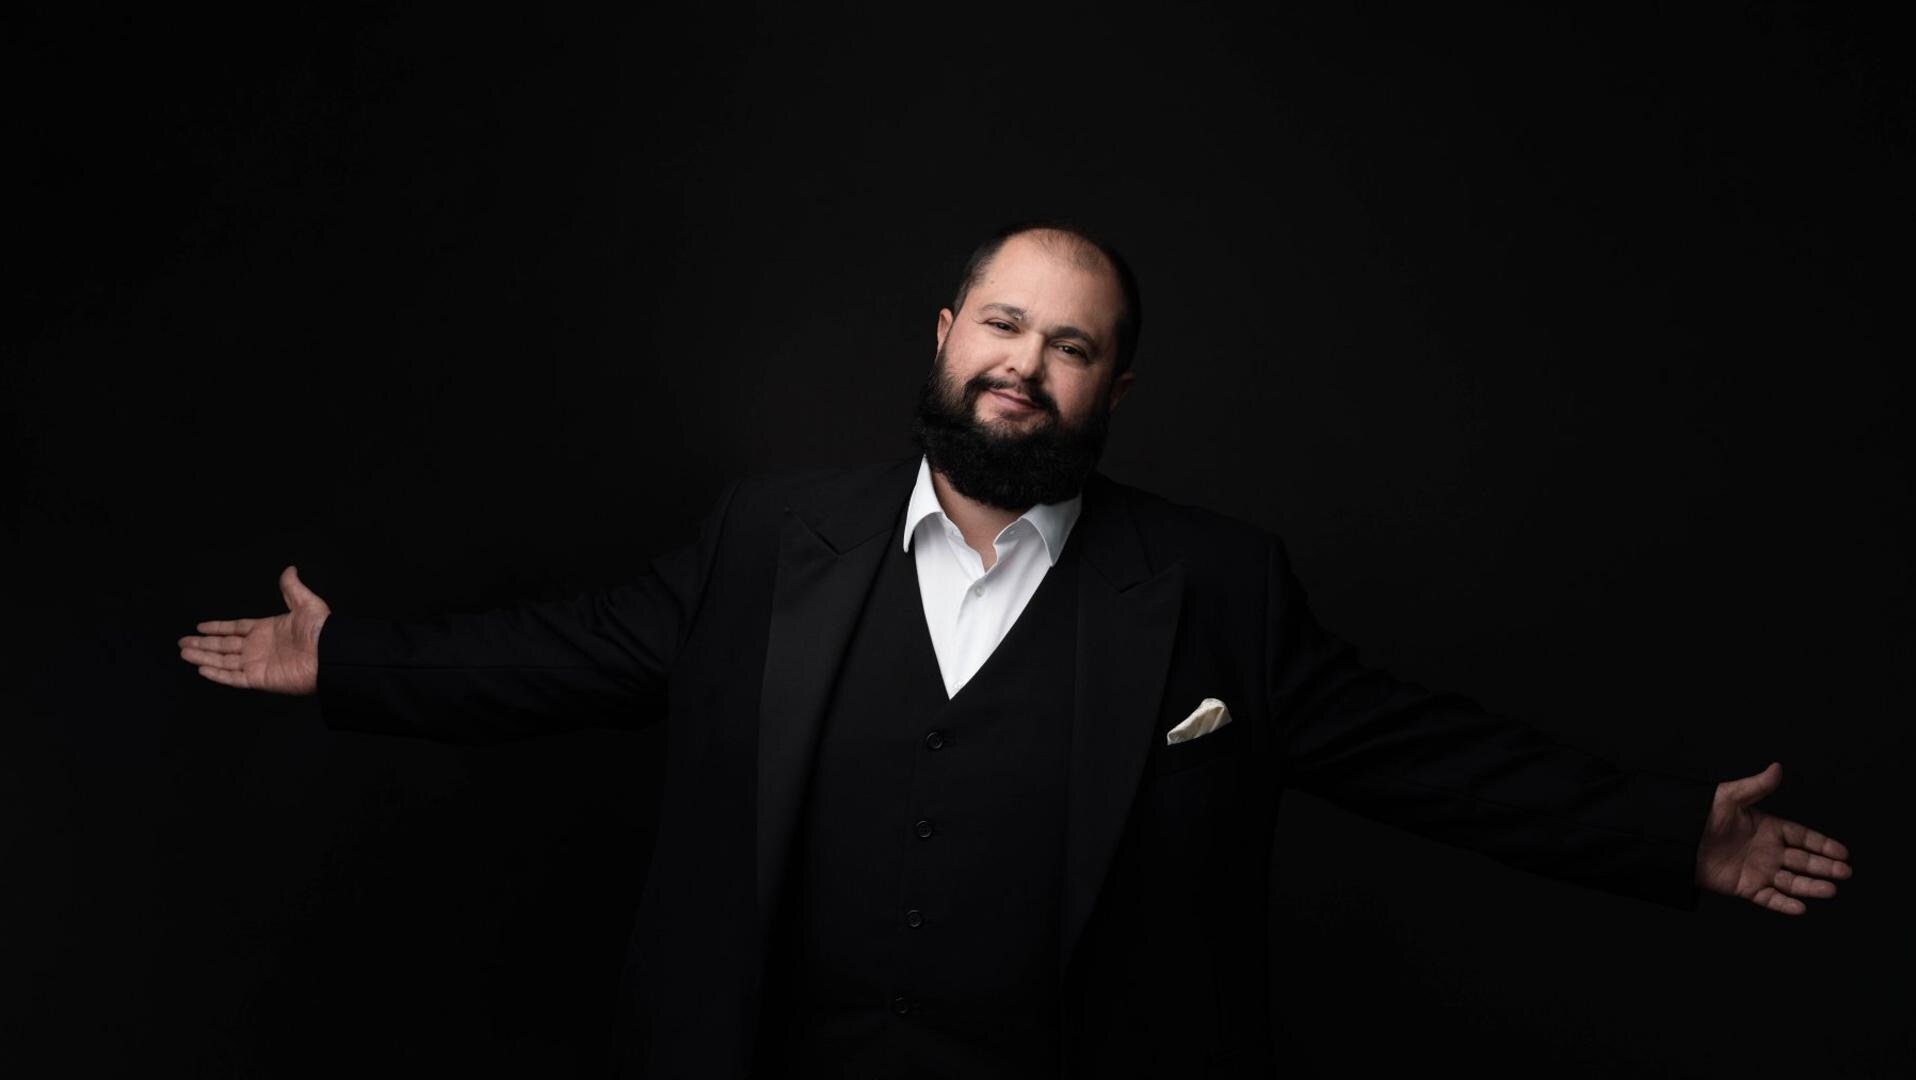 The Tenerife tenor Celso Albelo adds Des Grieux from 'Manon' to his repertoire